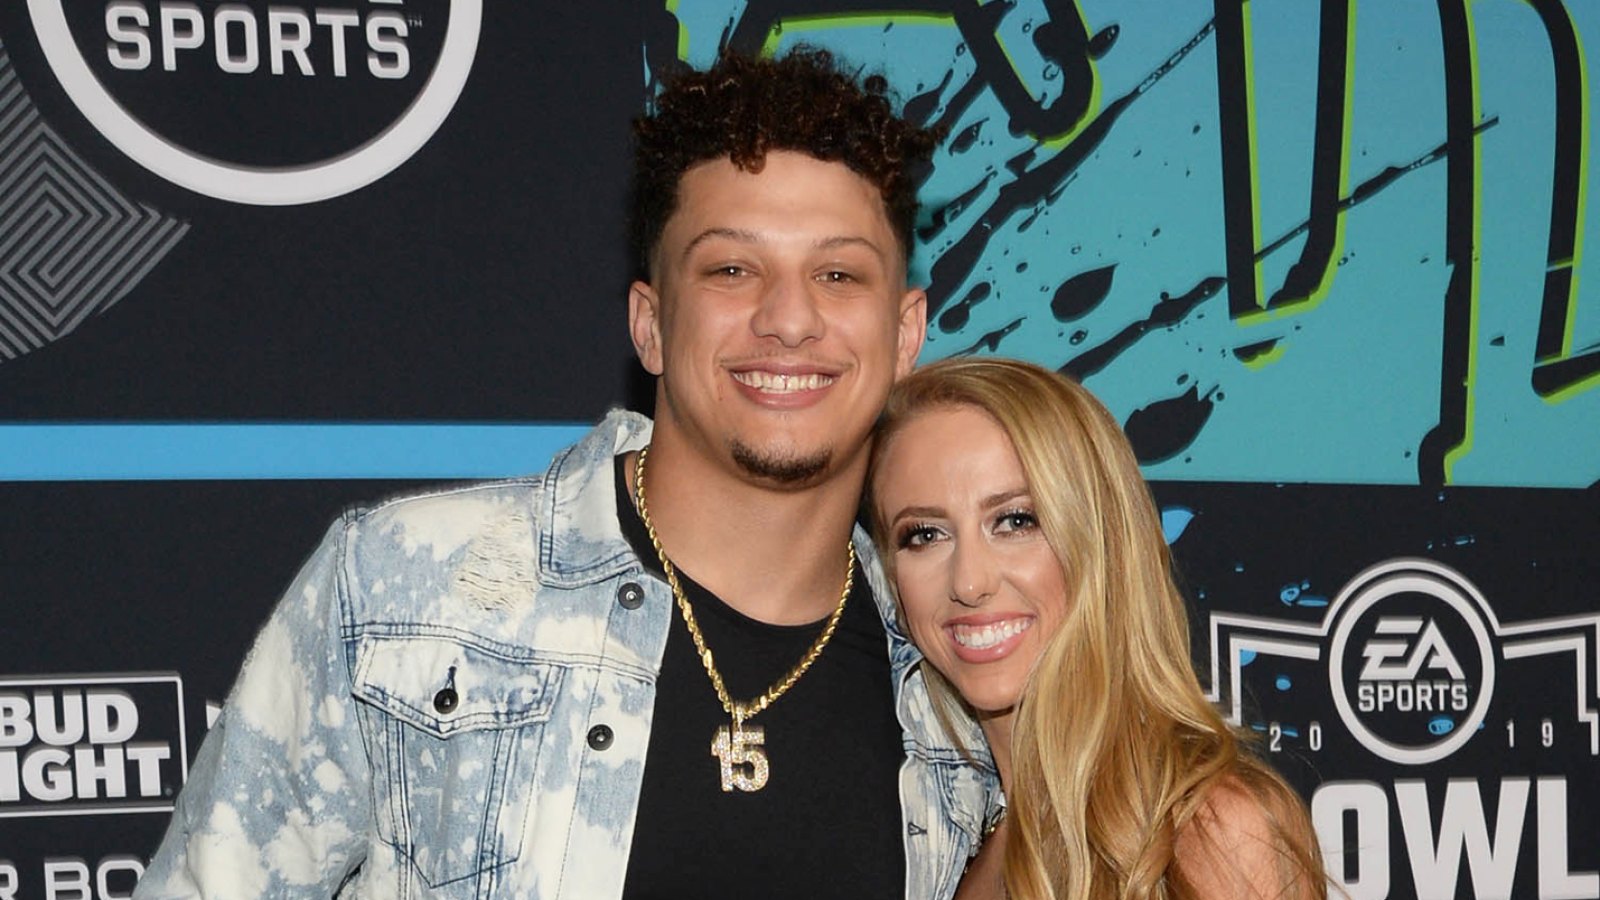 Brittany Mahomes fires back at haters calling her a gold digger